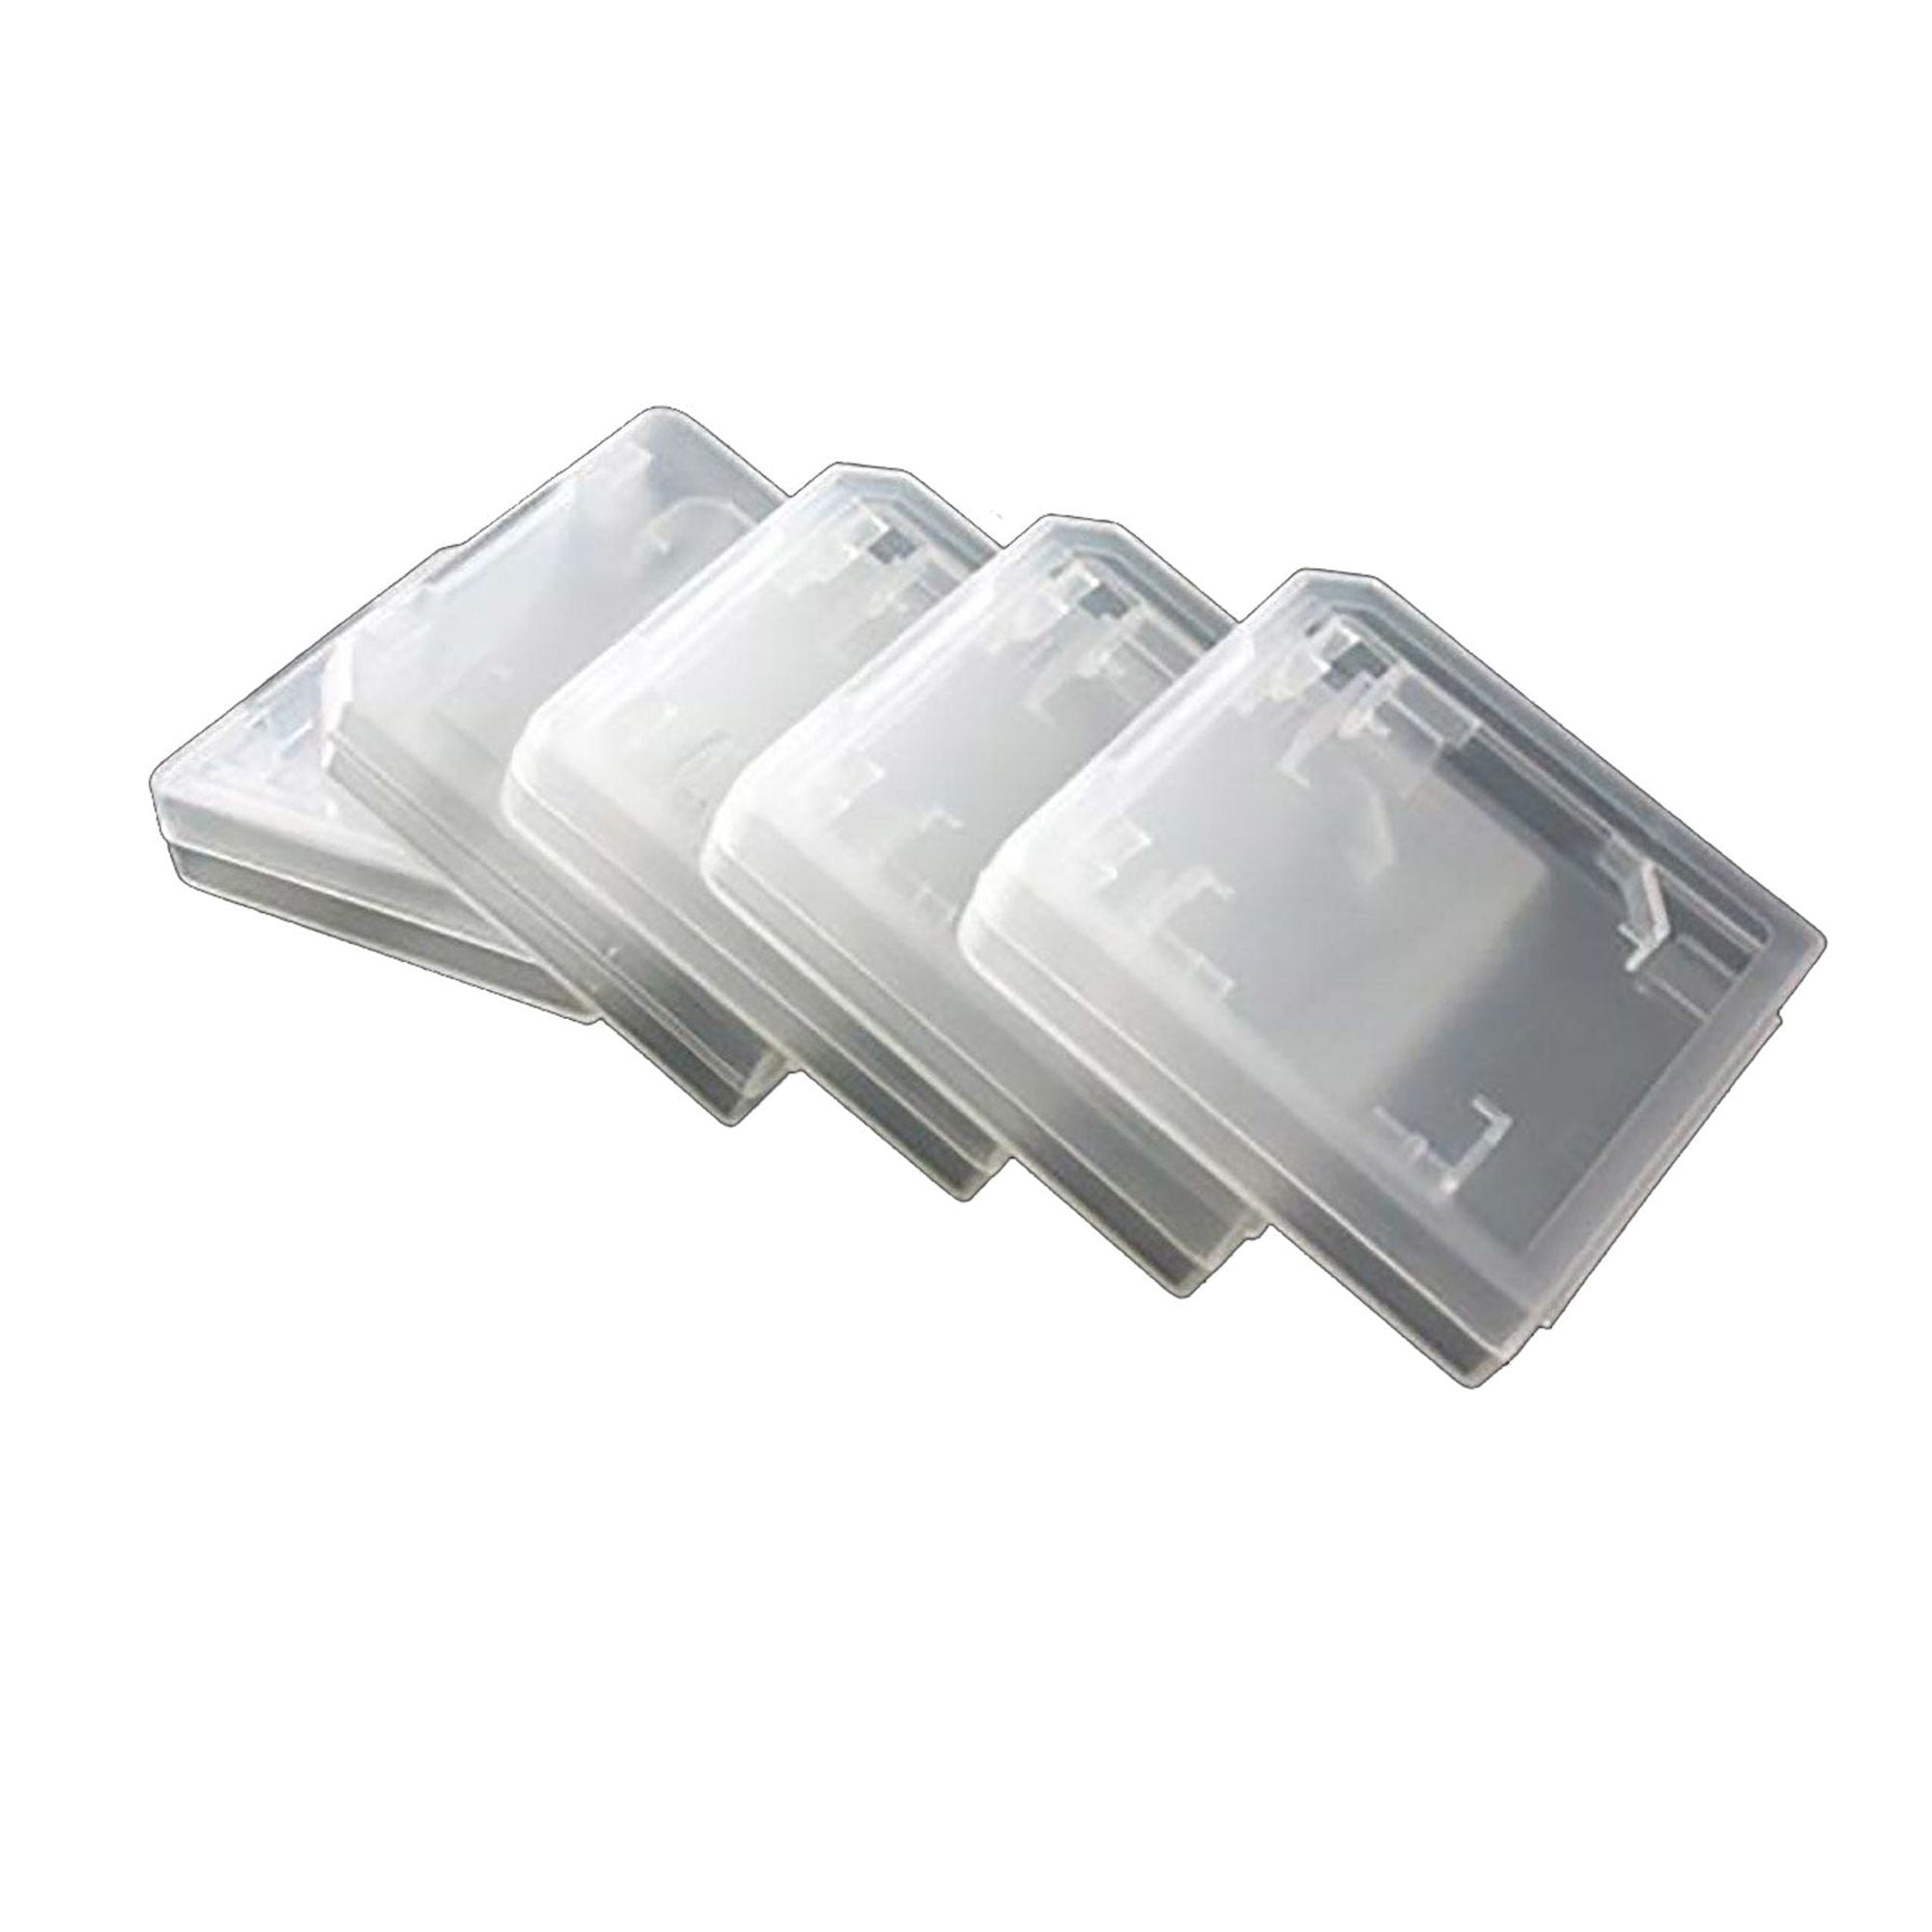 KMD 5Pack Game Cartridge Case for Nintendo DS Lite/DSi/3DS/New 3DS/New 3DS XL